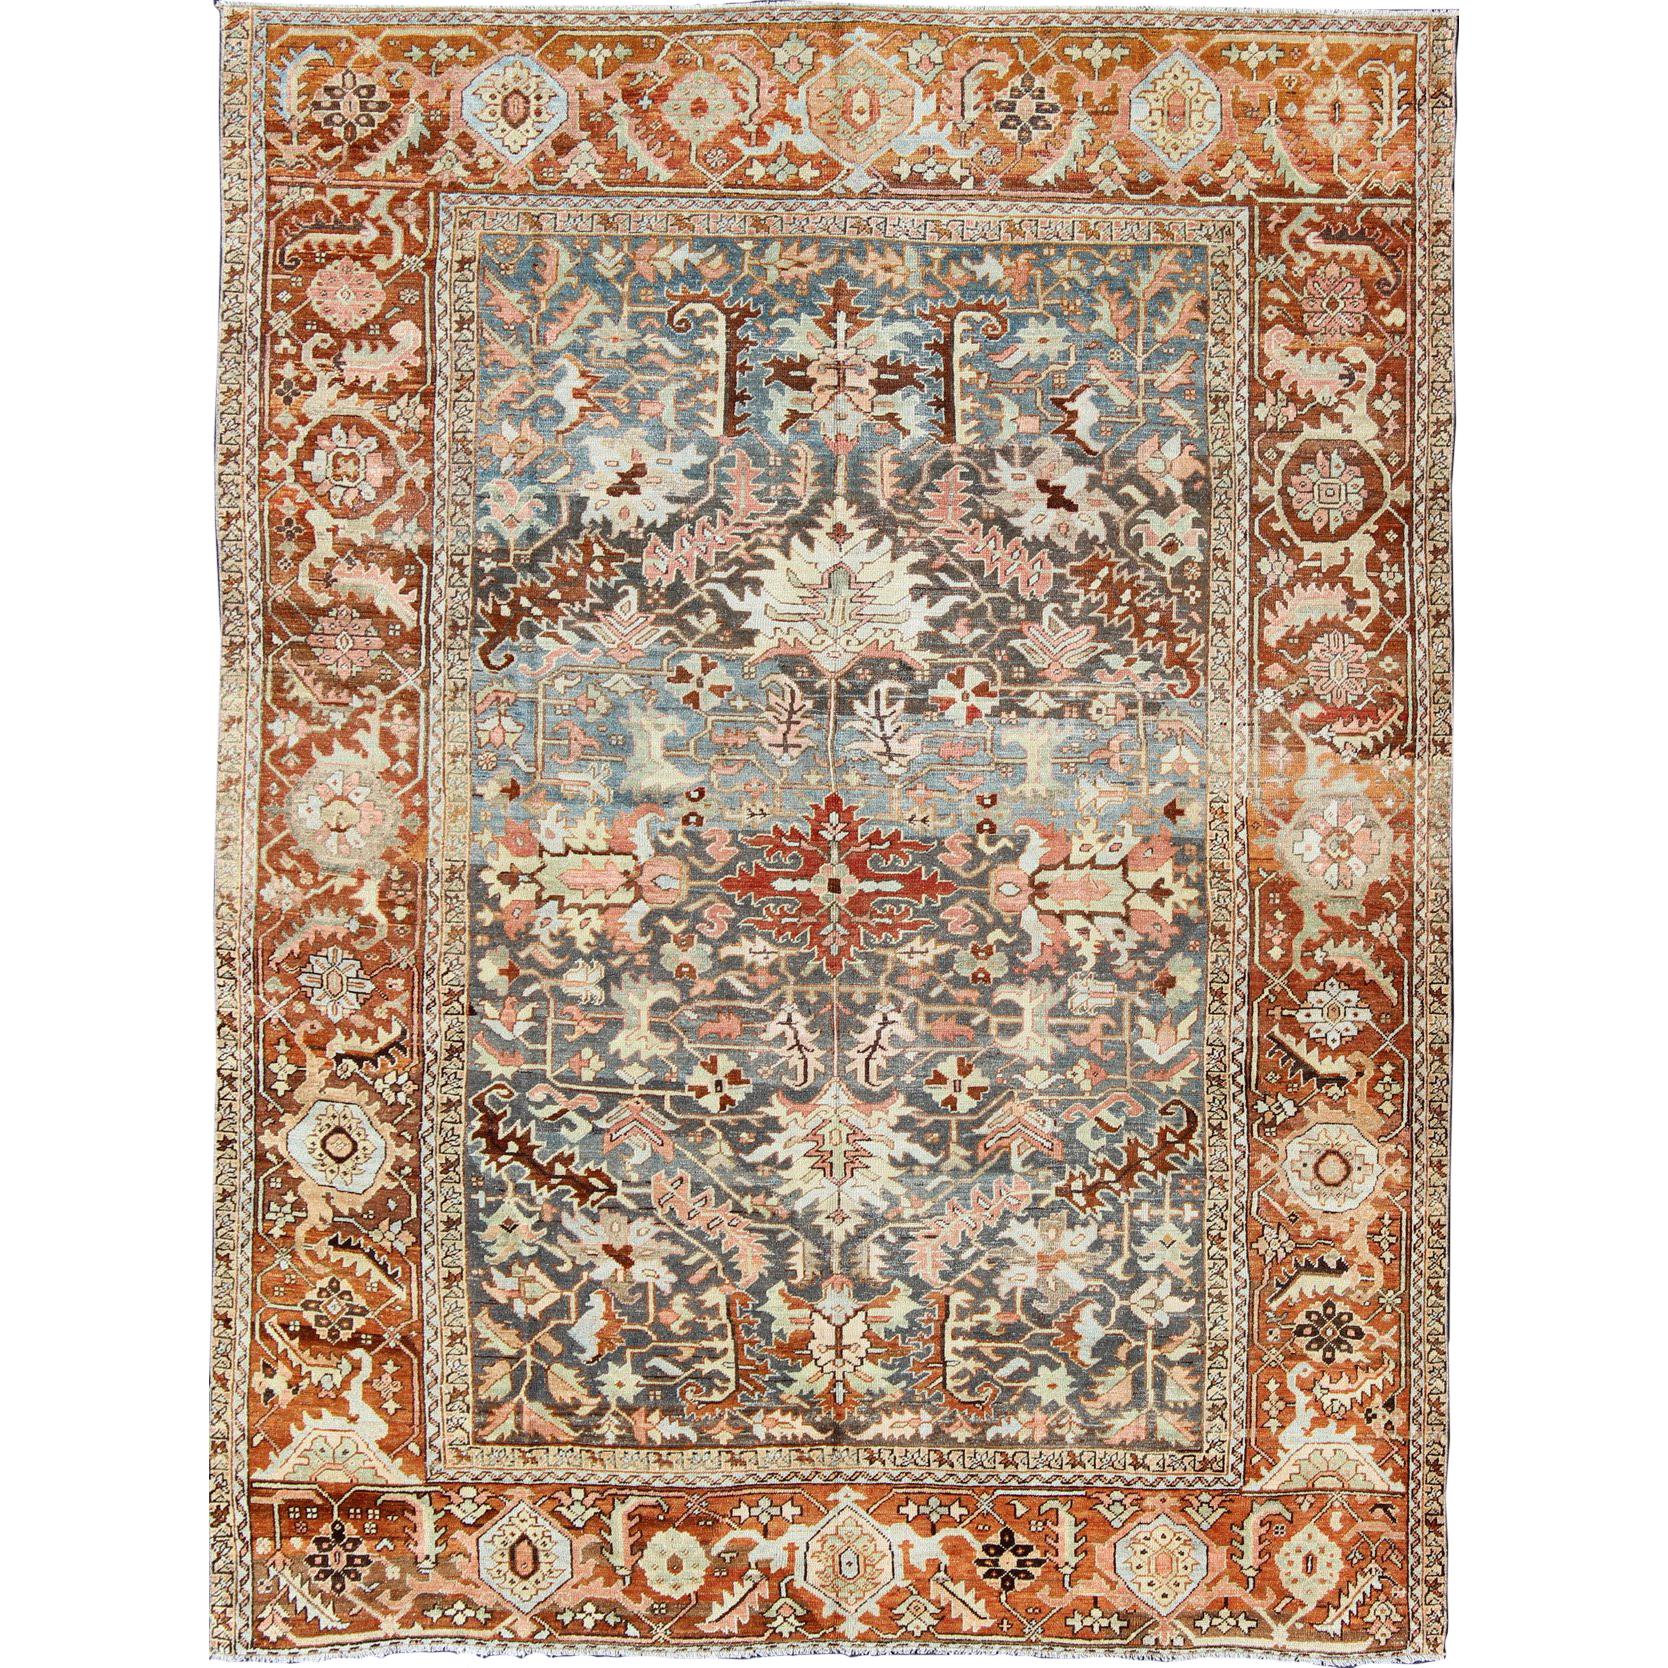 Antique Persian Bakshaish Rug with Medallions and Flower Motifs